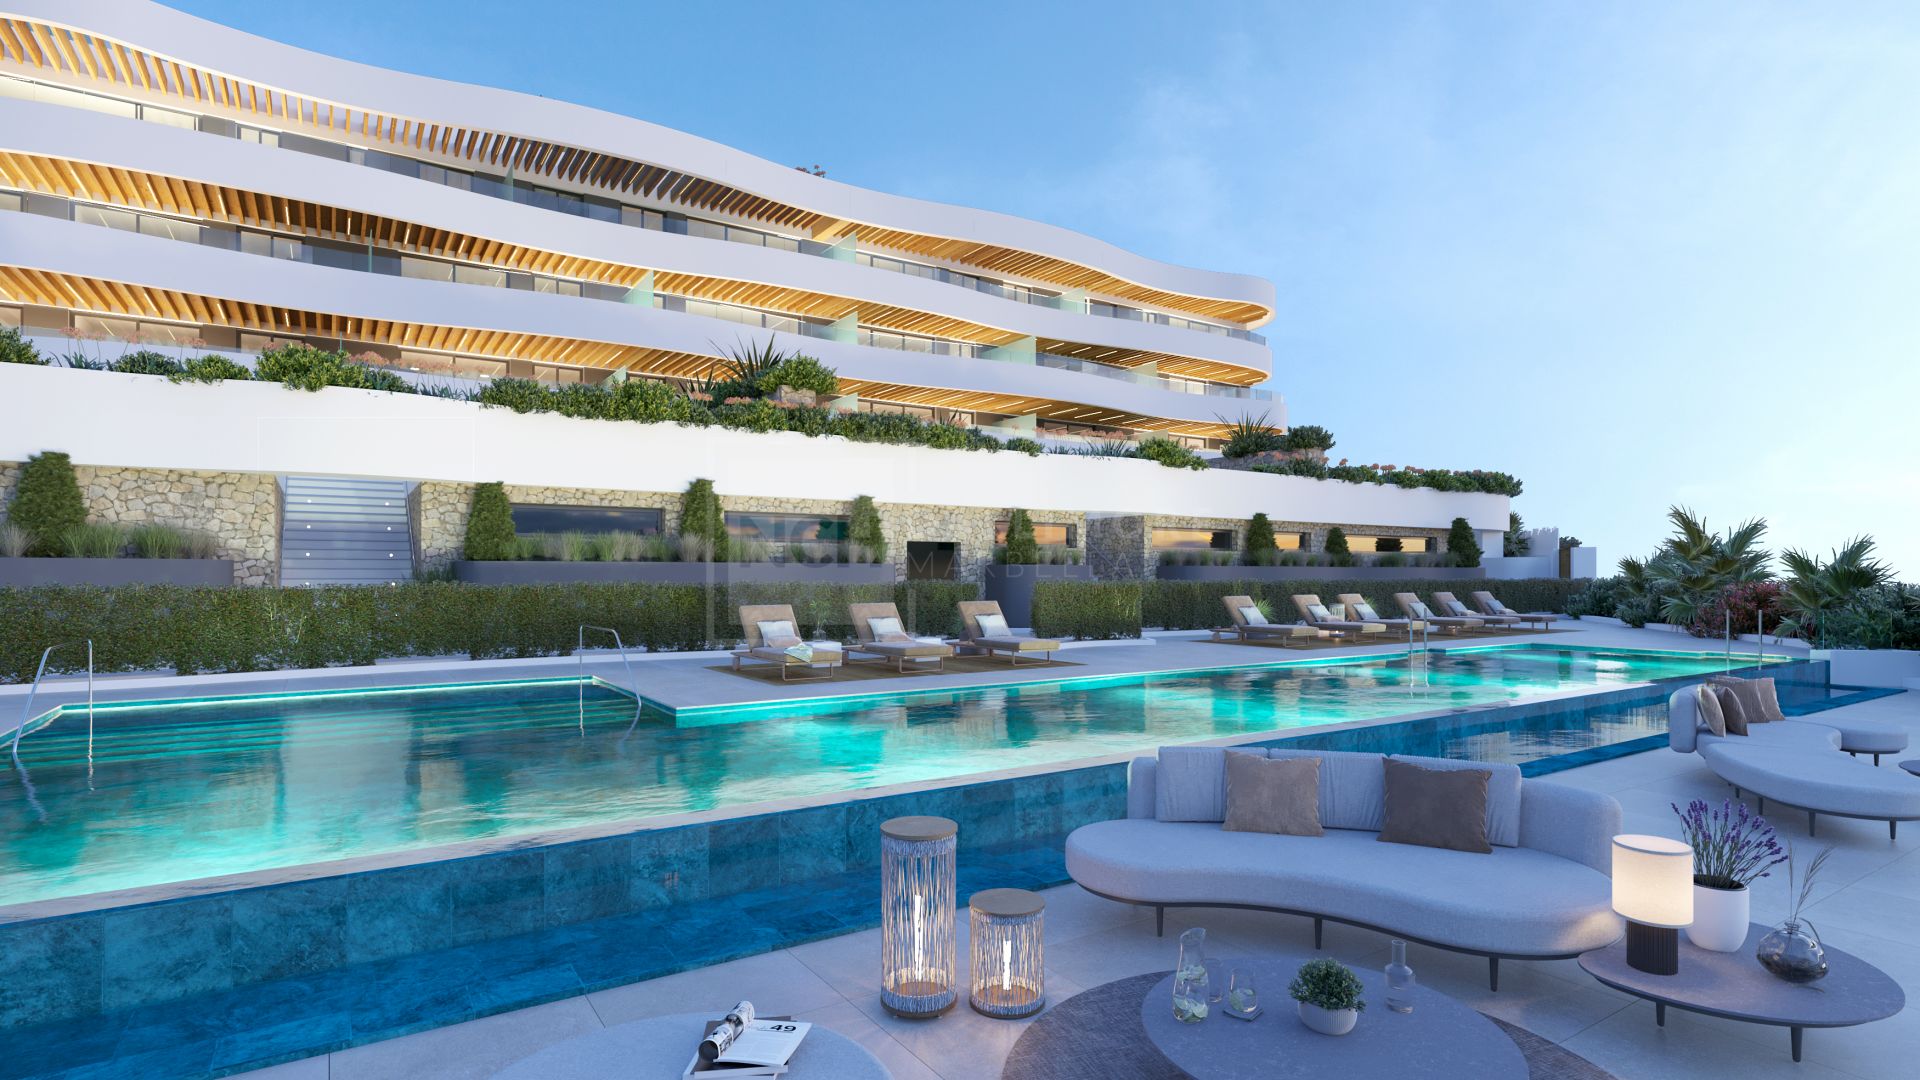 STRIKING 3- BEDROOM CONTEMPORARY PENTHOUSE APARTMENT FOR SALE IN MIJAS COSTA